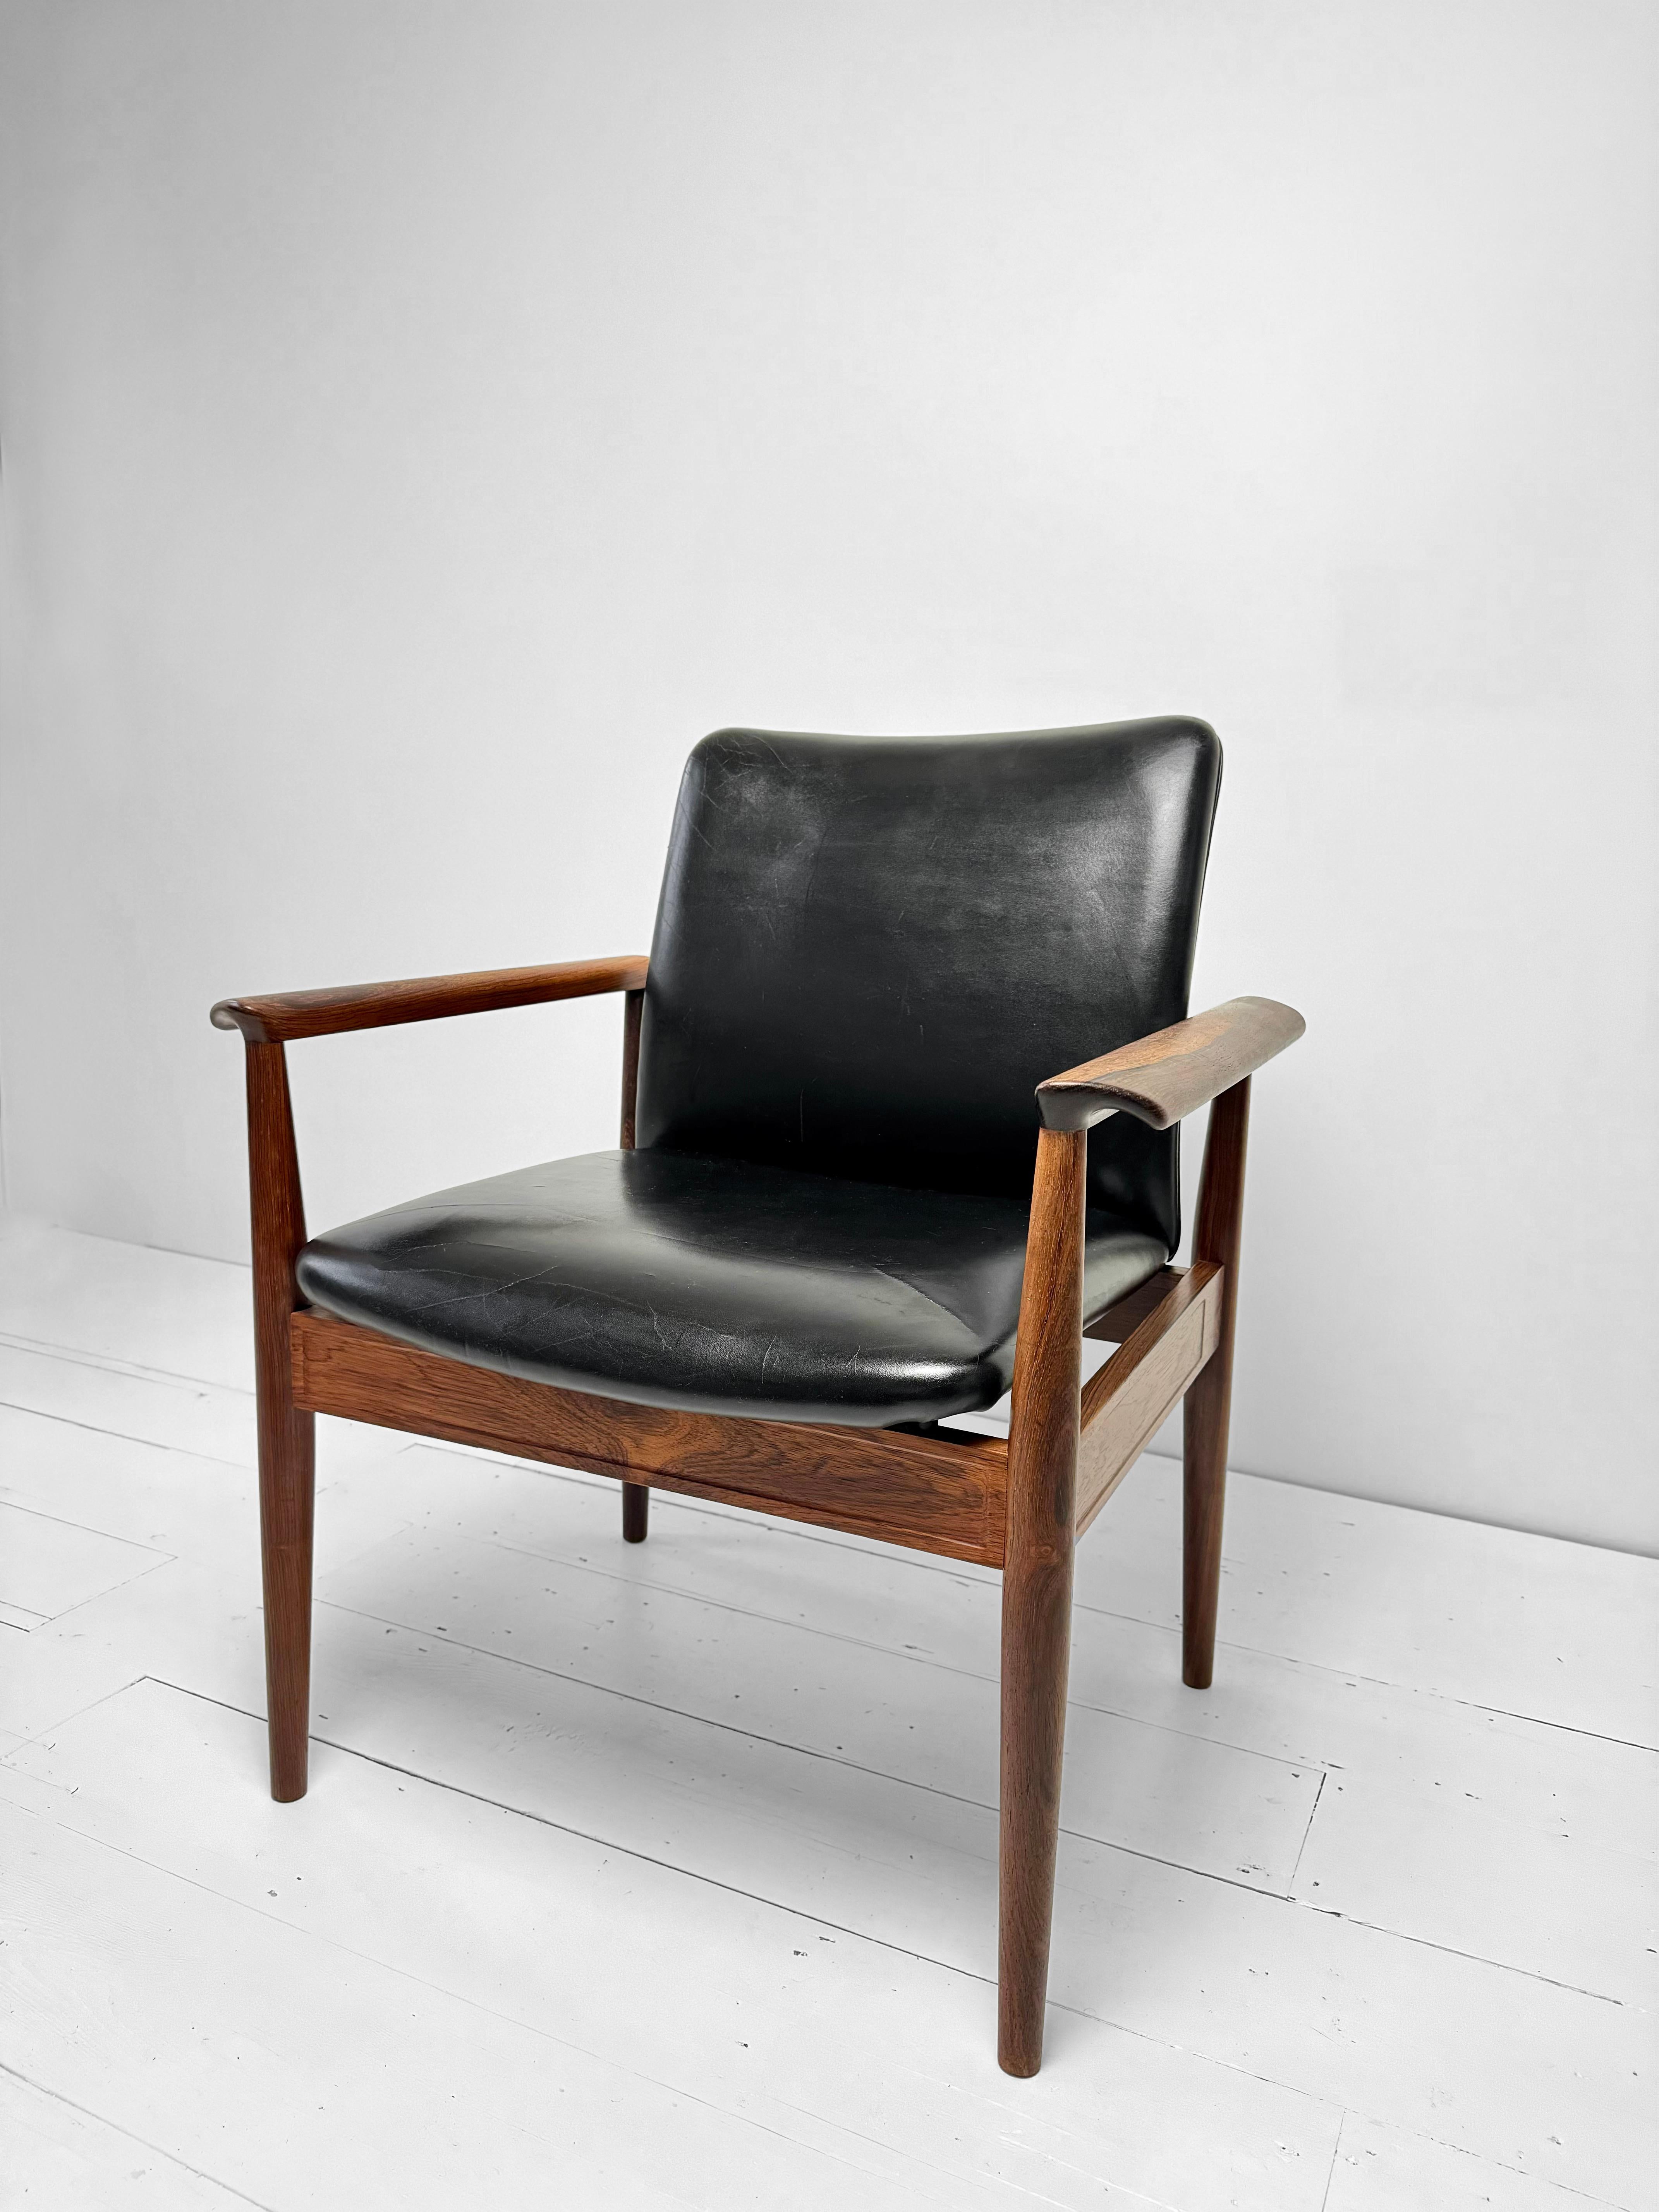 Set of Diplomat Armchairs in Rosewood and Leather by Finn Juhl, Denmark c.1960's For Sale 2